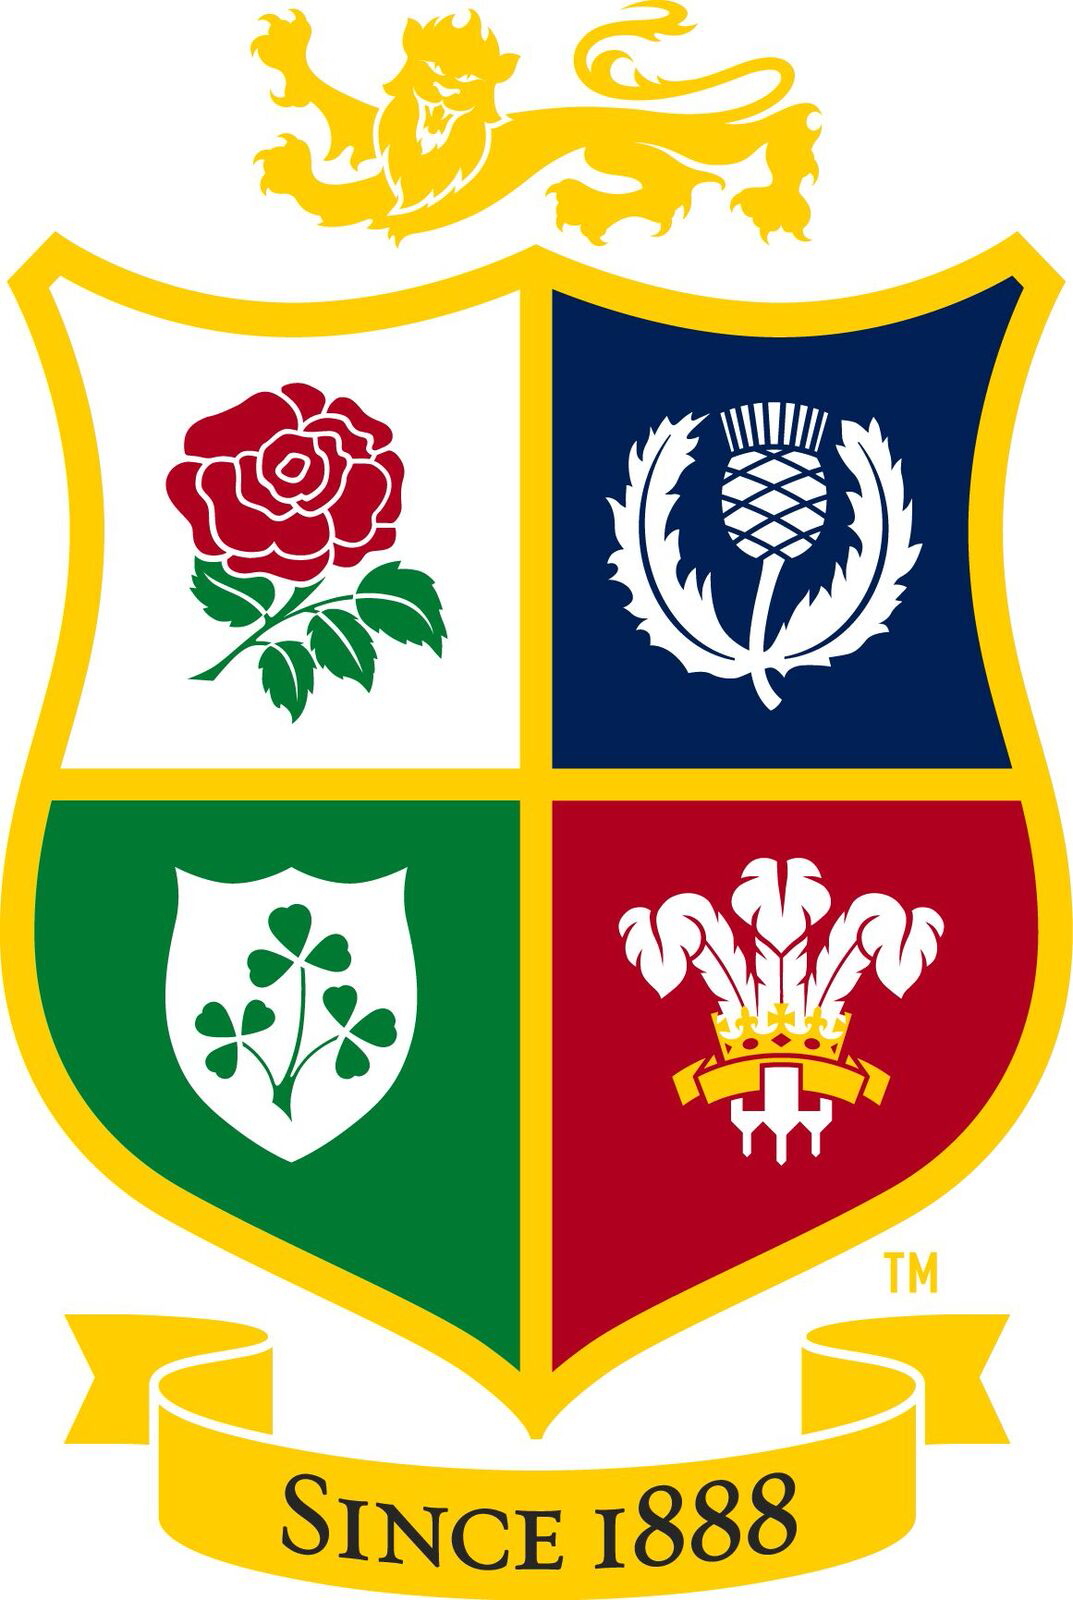 The British & Irish Lions have named an unchanged starting line-up and bench for the 3rd Test at Eden Park on Saturday. Sam Warburton will again lead the 23 who secured victory in the 2nd Test in Wellington. It is the first time since 1993 that the Lions have kept the same XV for consecutive Tests.